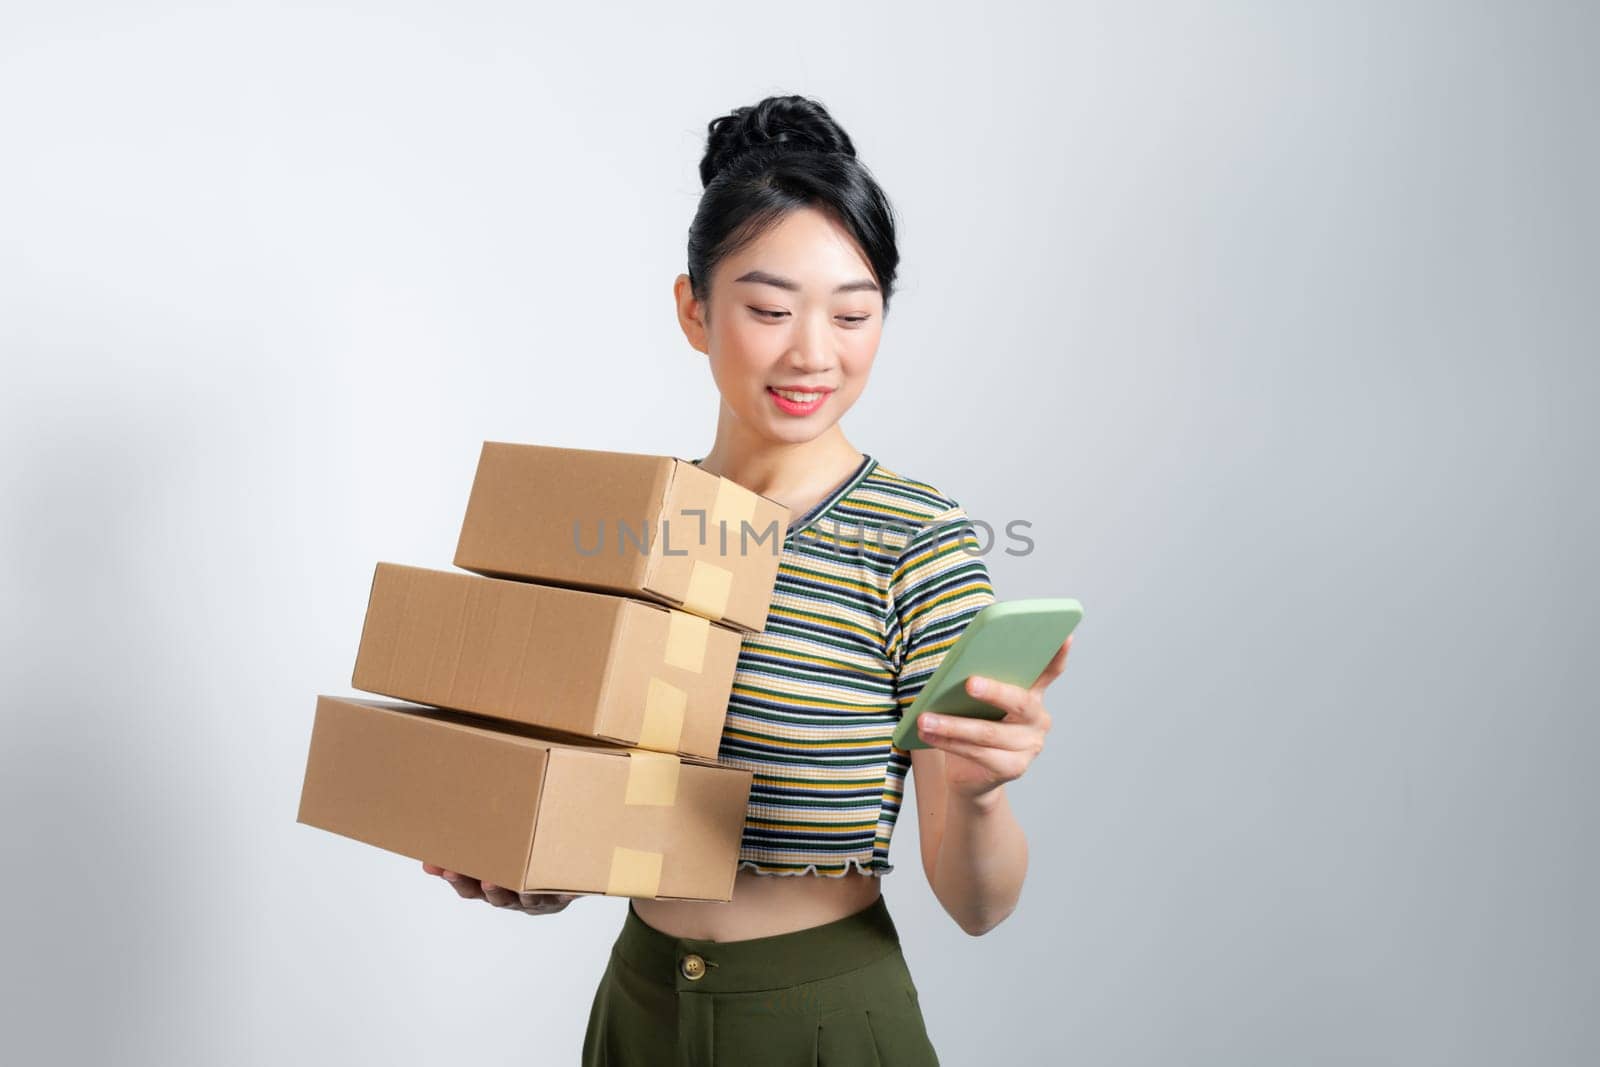 Young excited beautiful asian woman holding smartphone parcel cardboard standing on isolated white background.